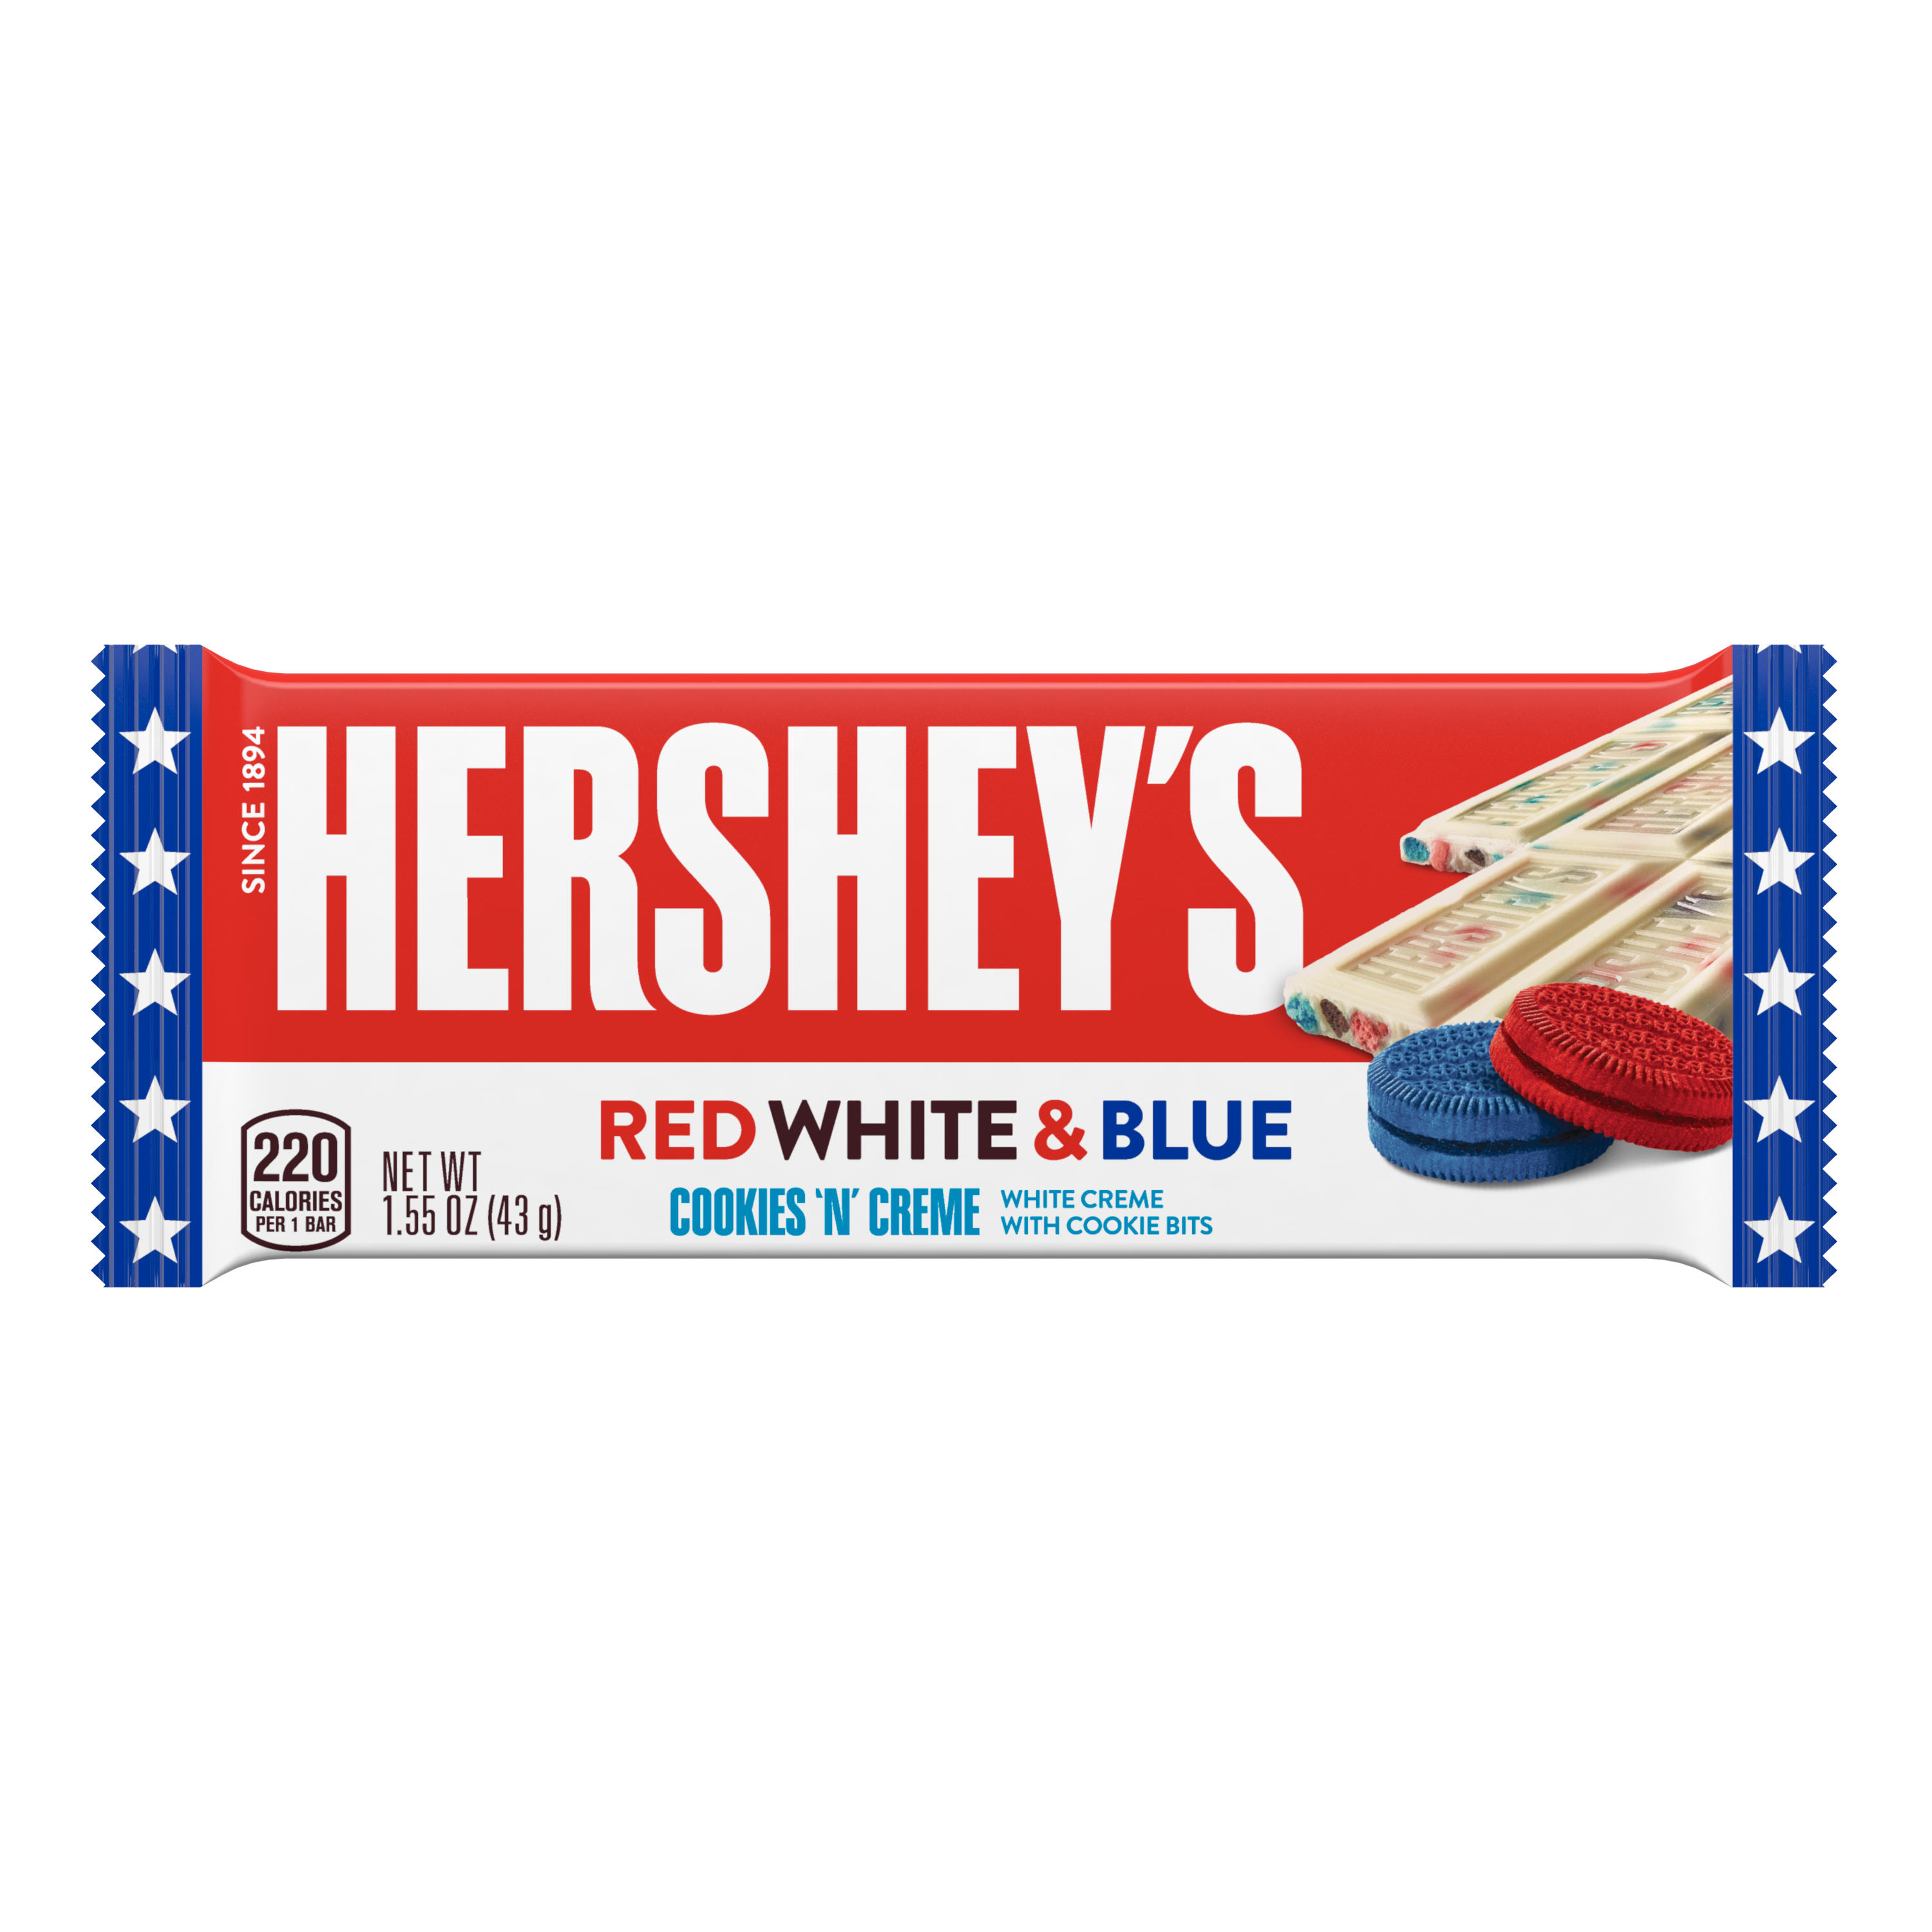 HERSHEY’S COOKIES ‘N’ CREME Red, White & Blue Candy Bar, 1.55 oz - Front of Package